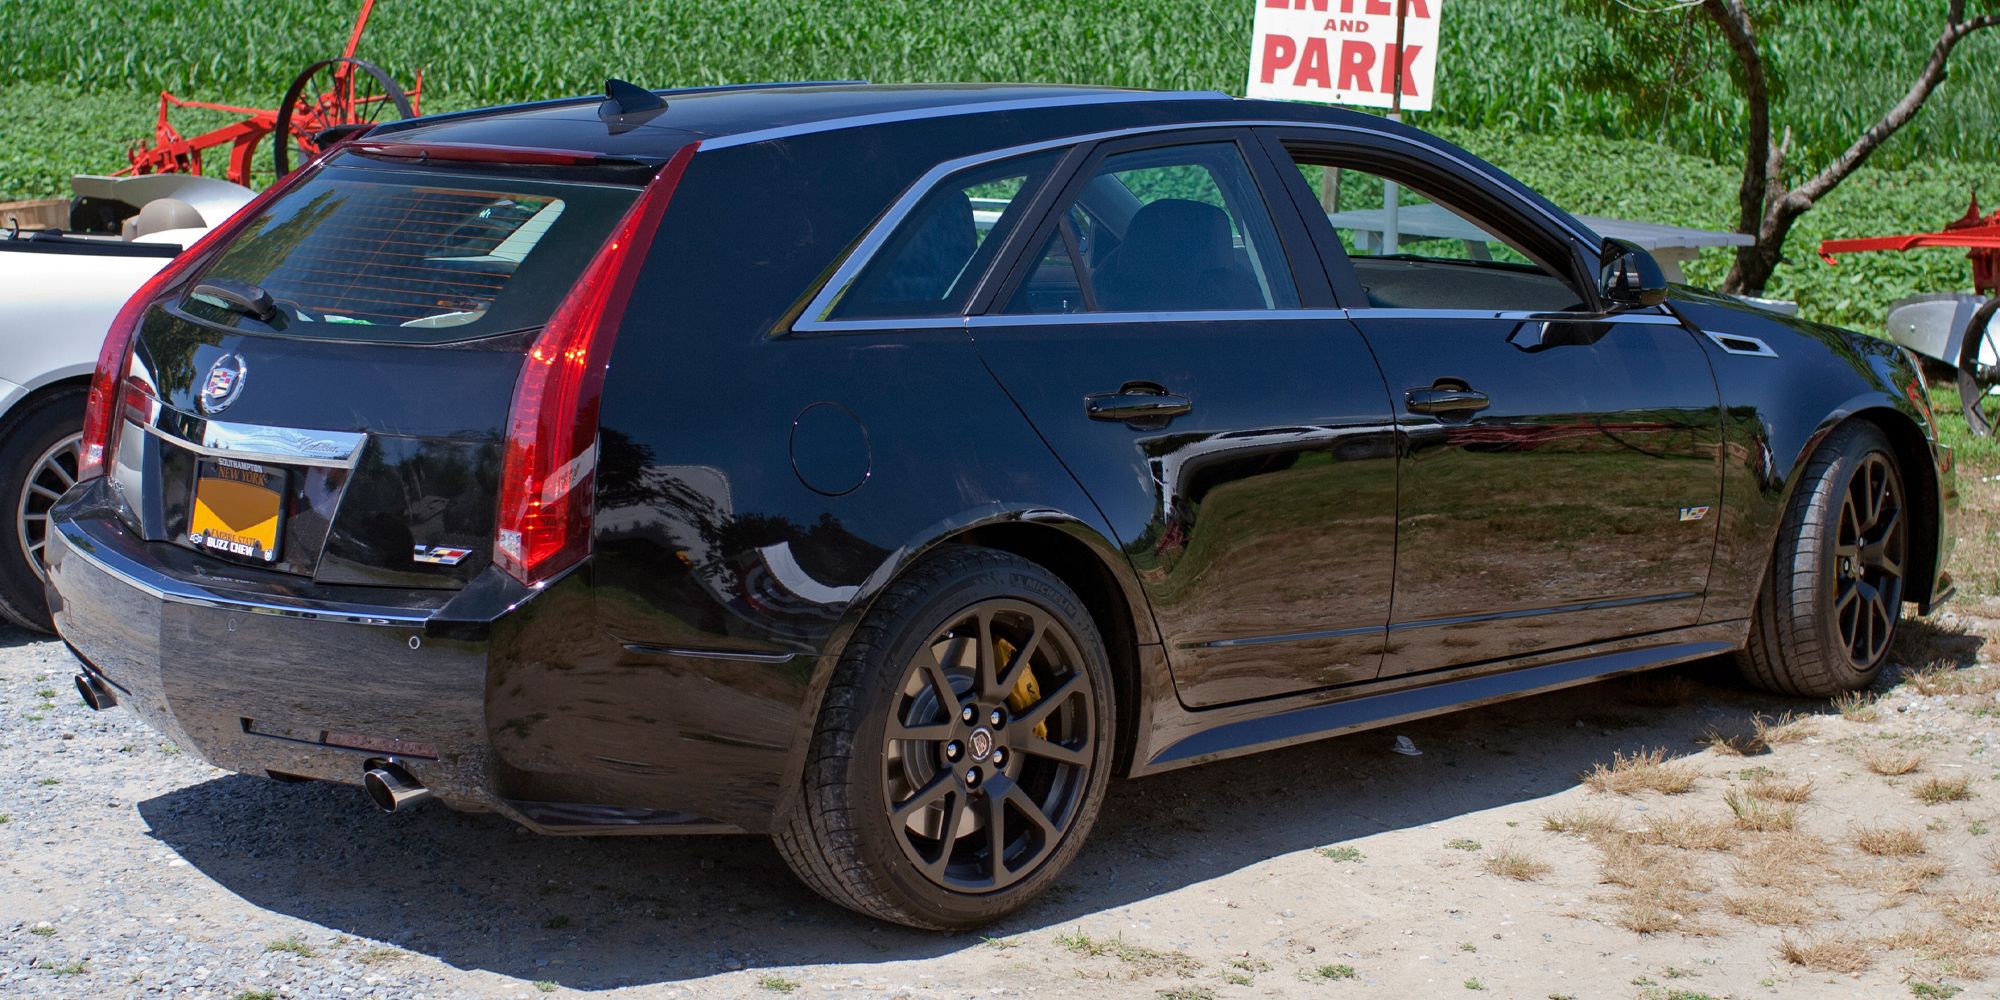 Rear 3/4 view of the CTS-V Wagon in black